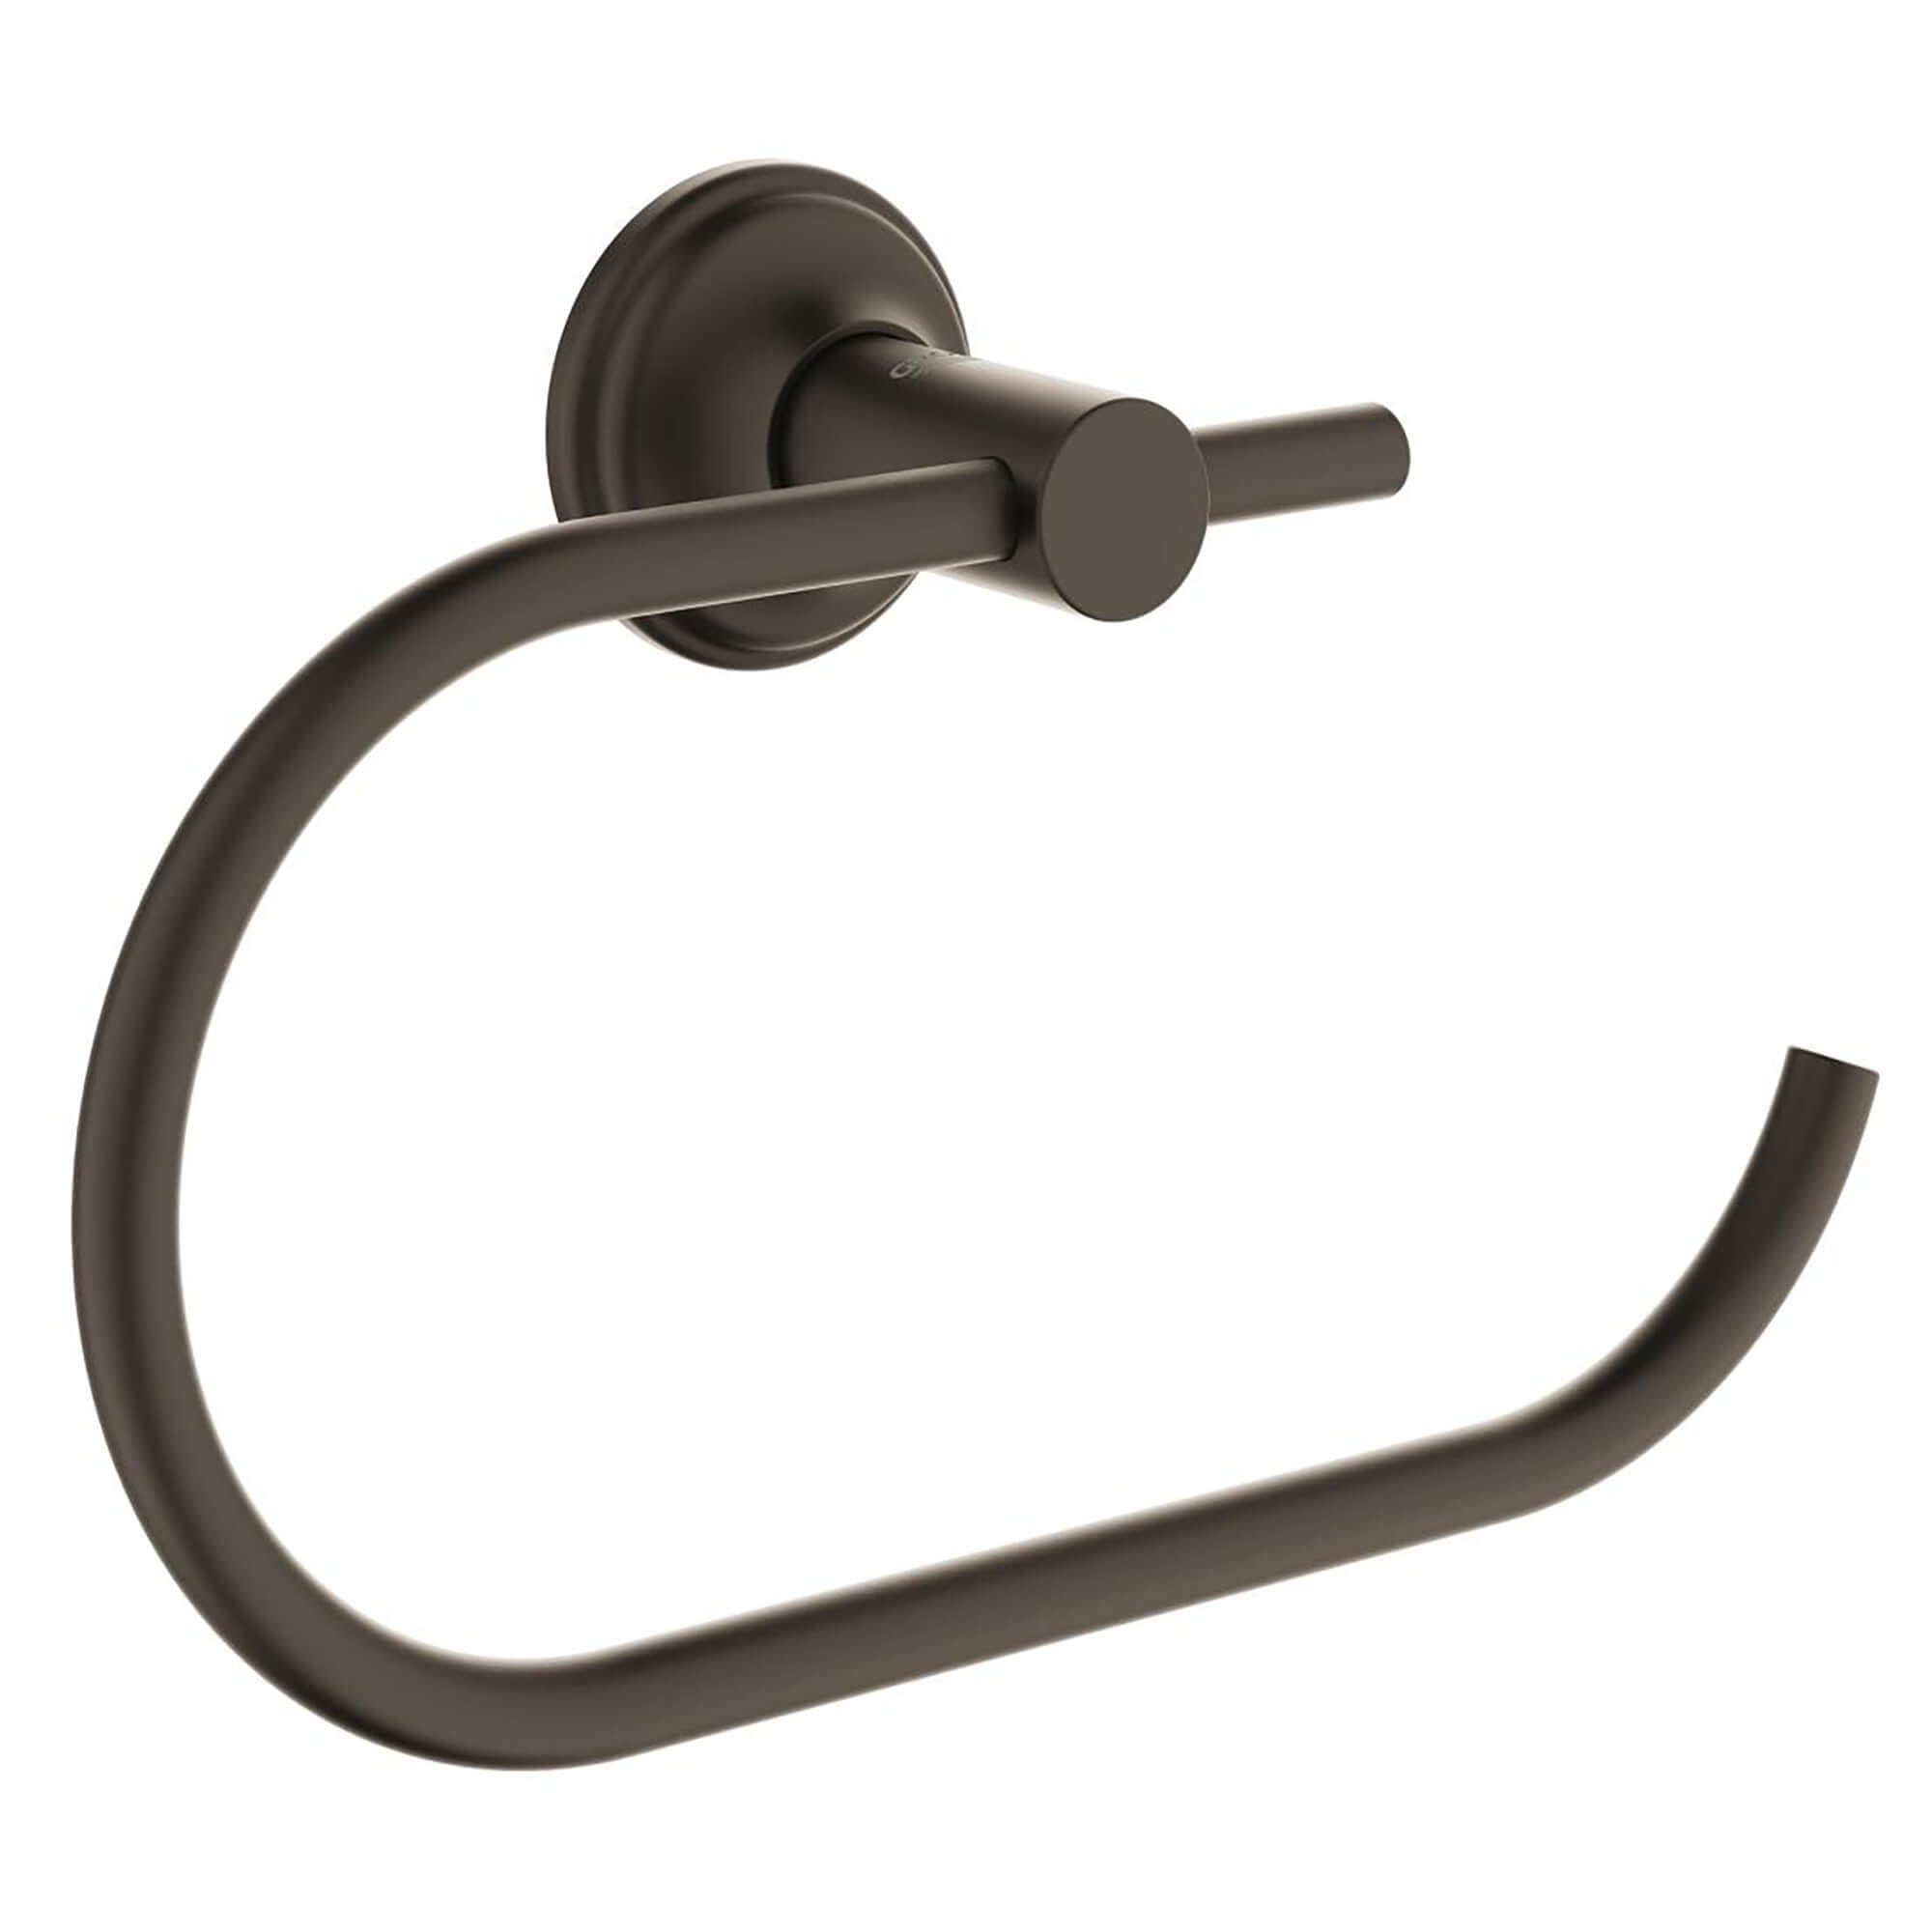 Toilet Paper Holder GROHE OIL RUBBED BRONZE